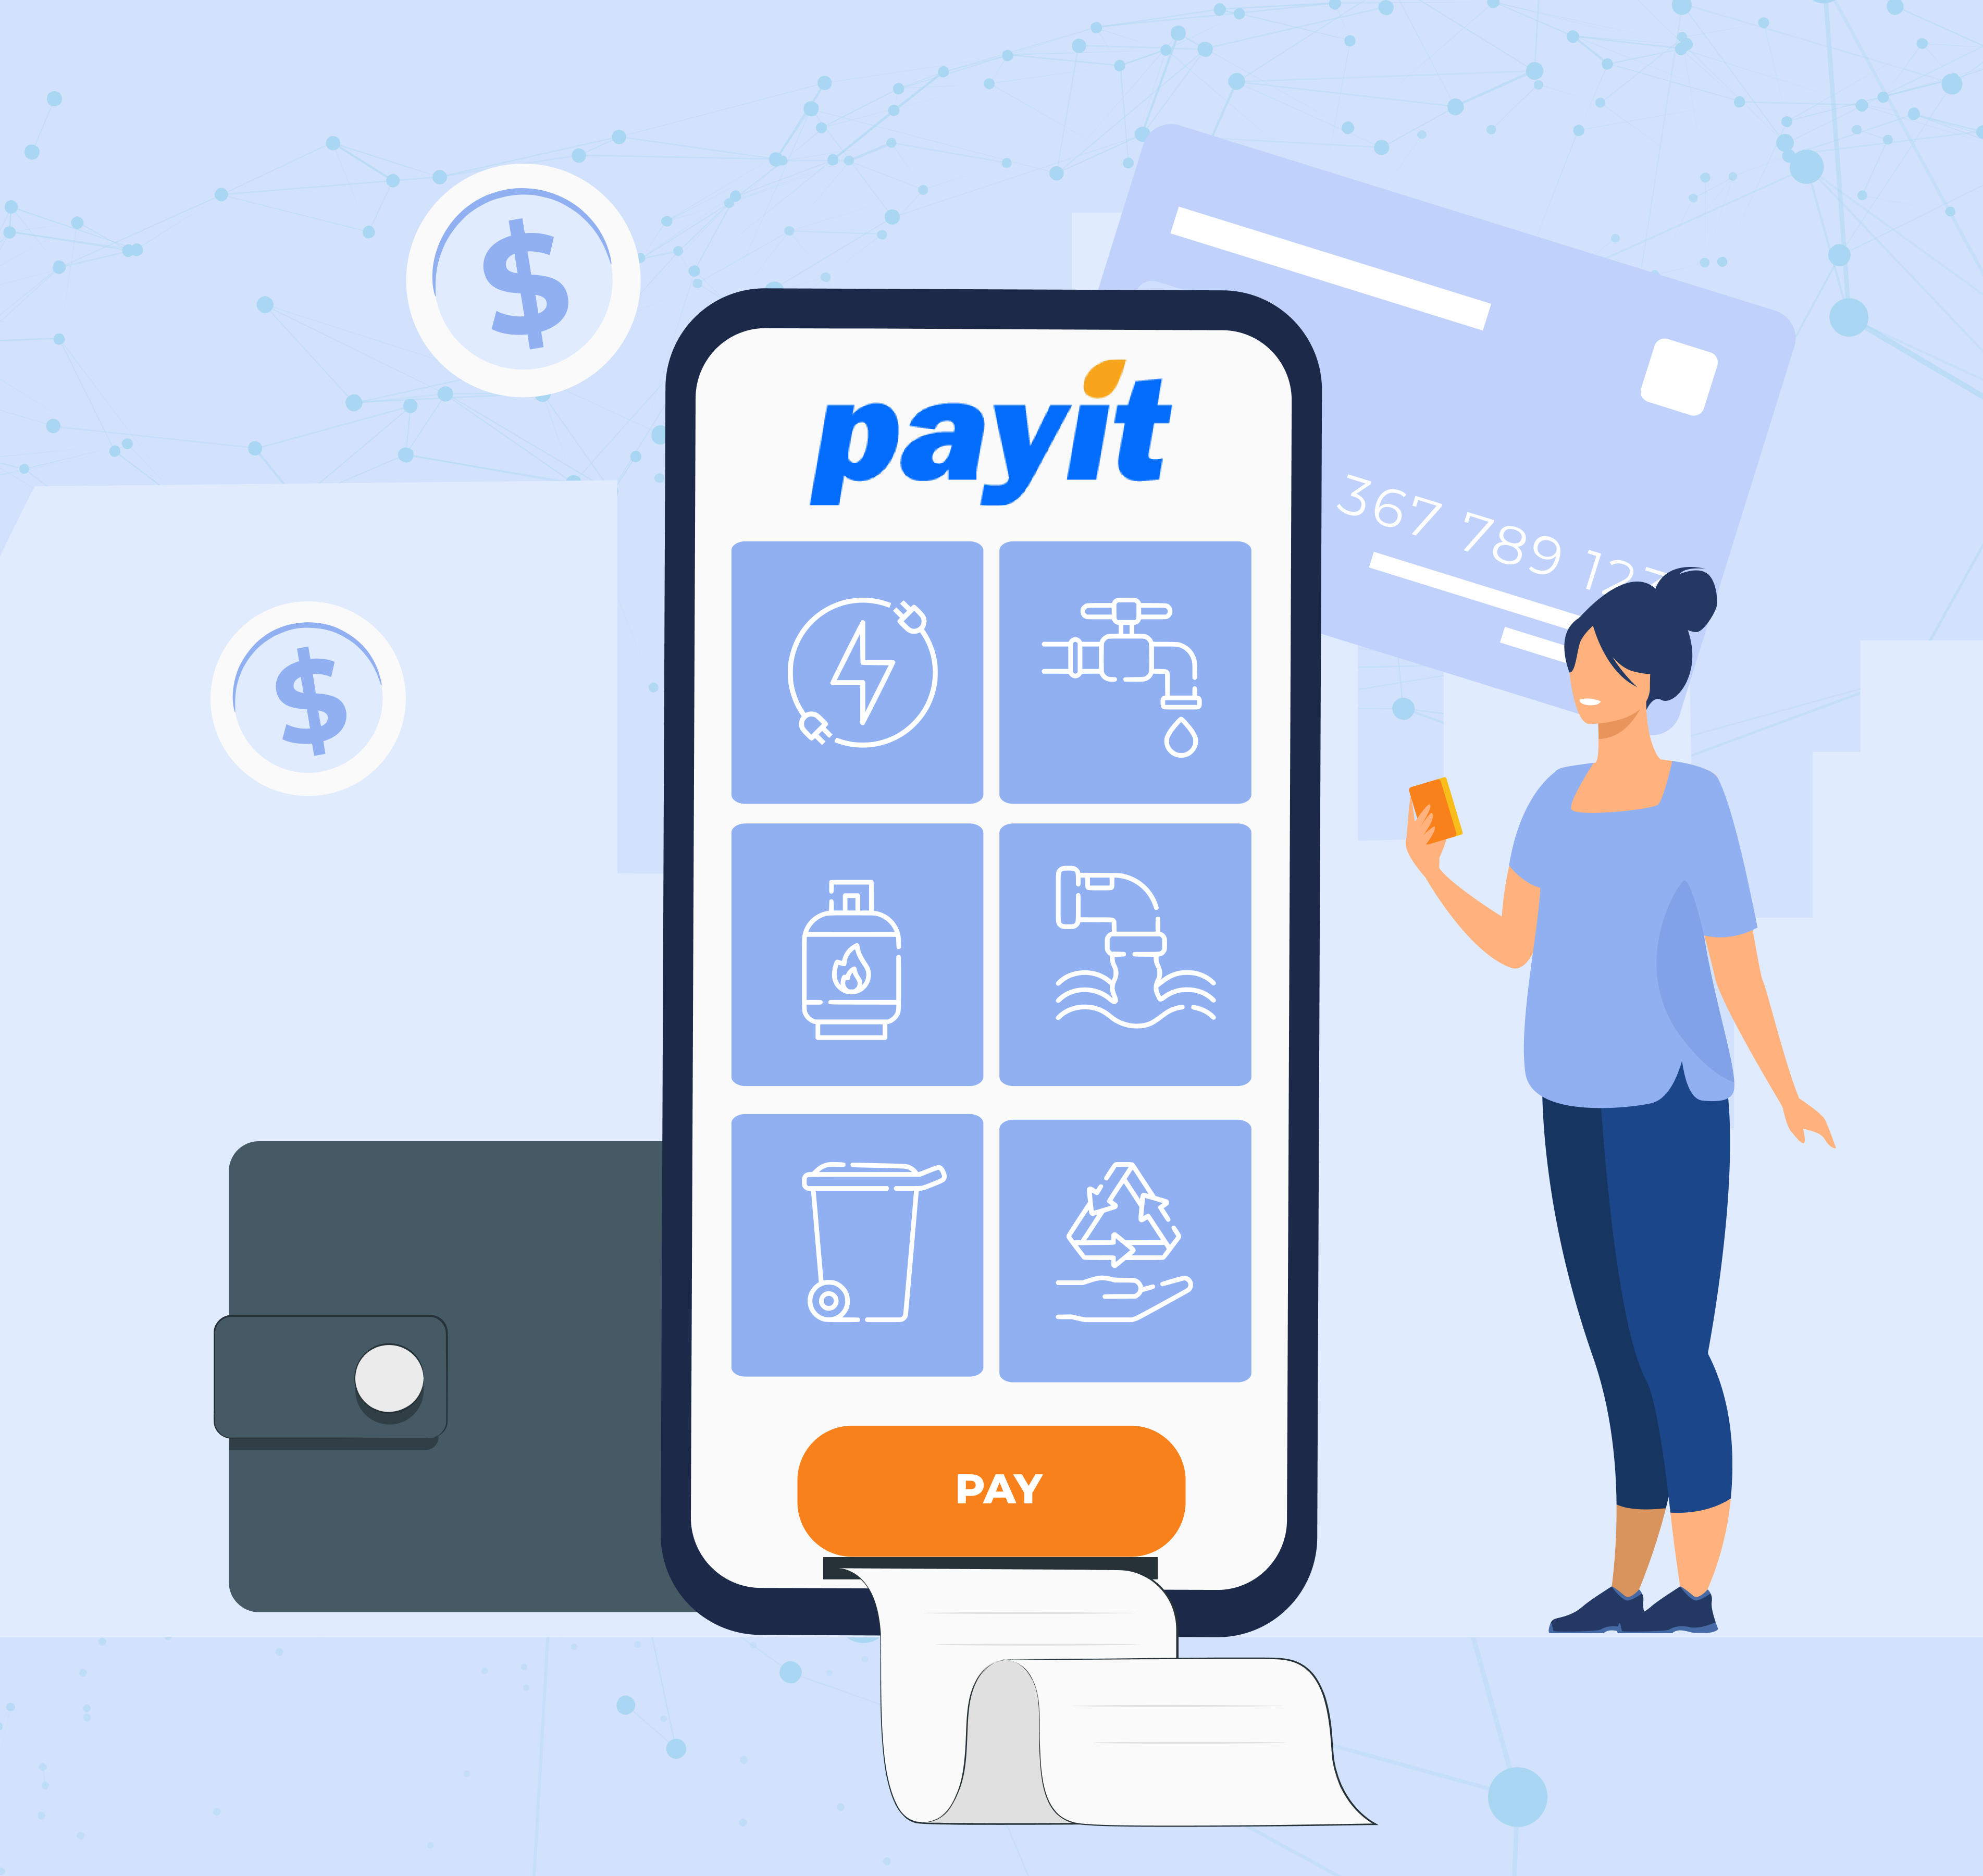 Residents can pay utility bills online through the PayIt government platform